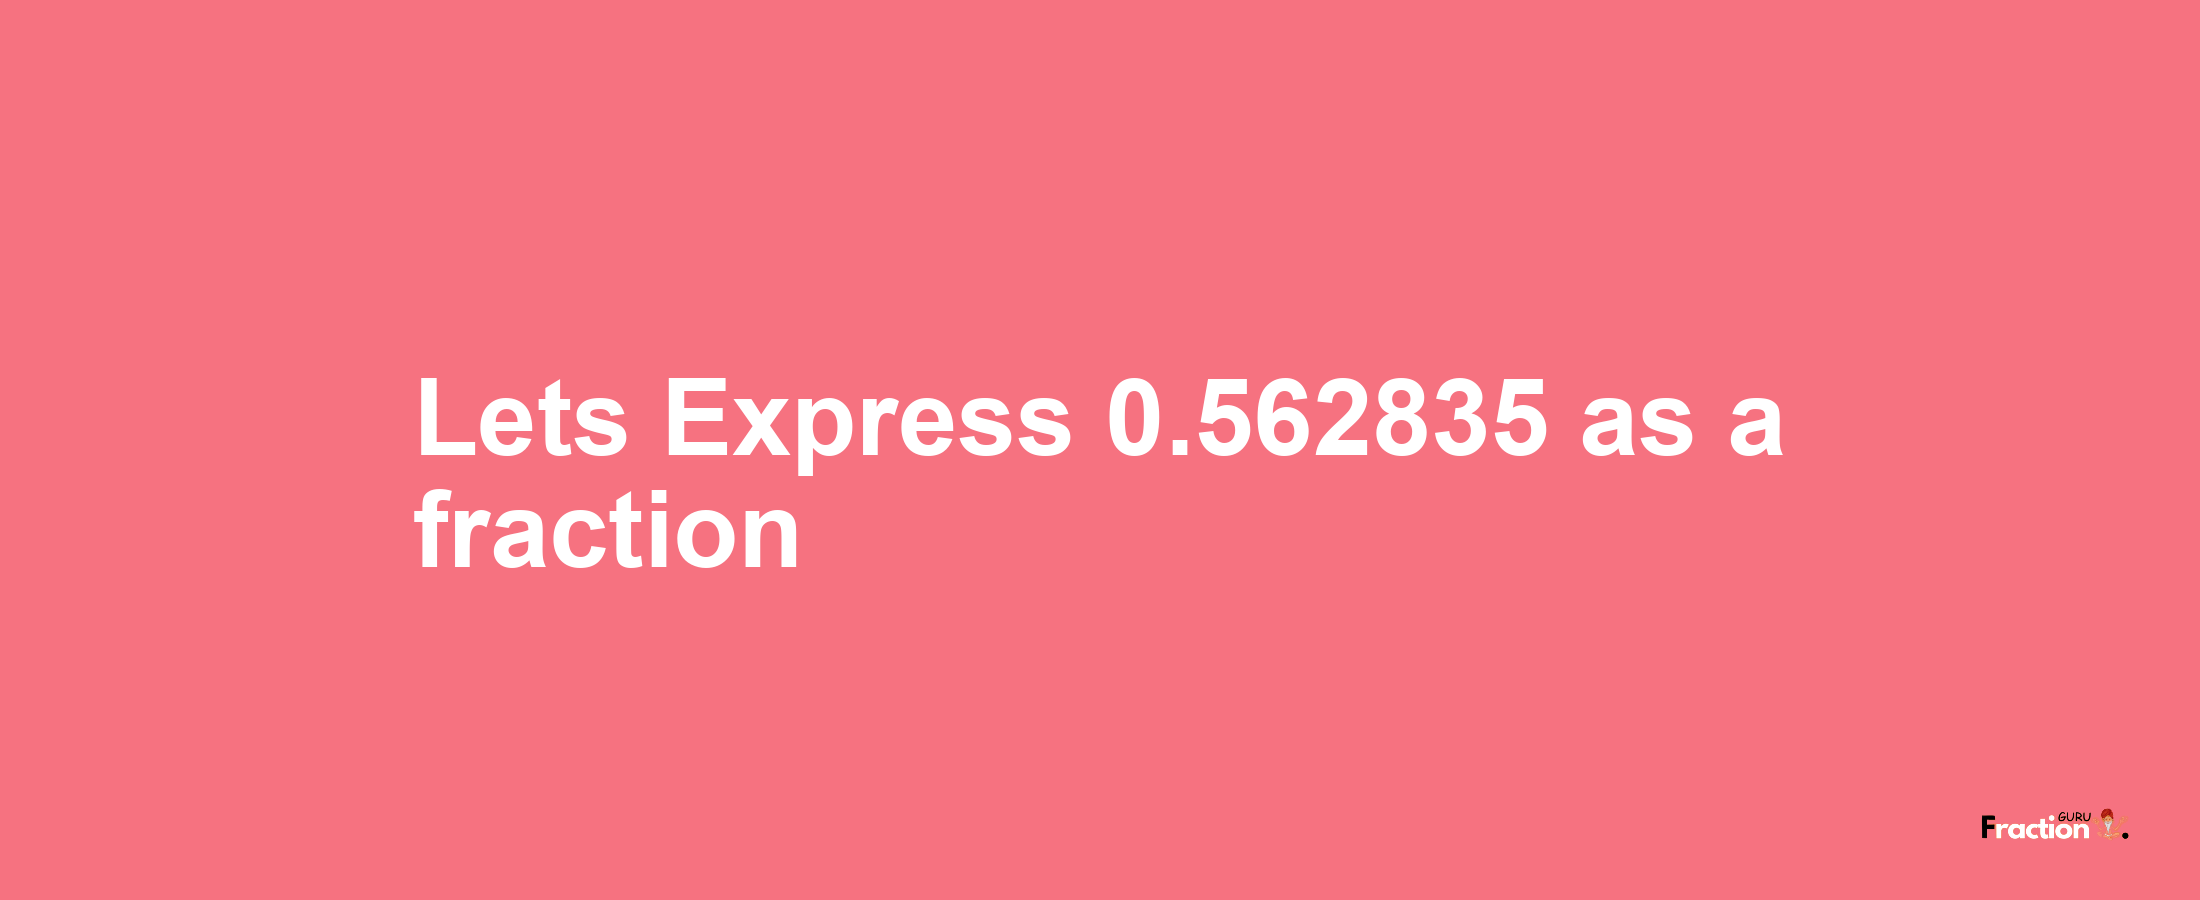 Lets Express 0.562835 as afraction